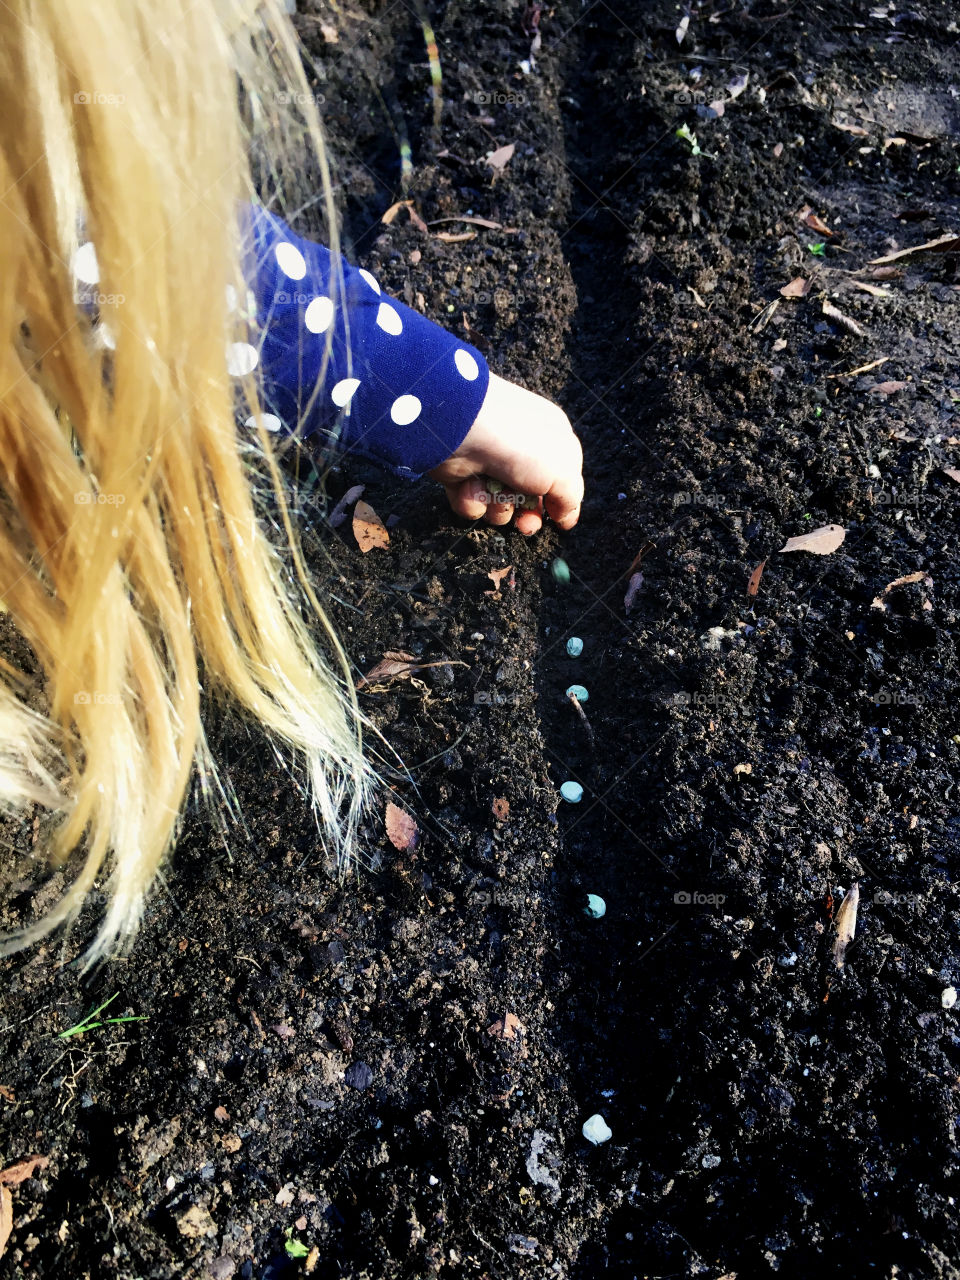 Little girl with long blonde hair planting green peas in the soil of a raised bed for a spring garden.